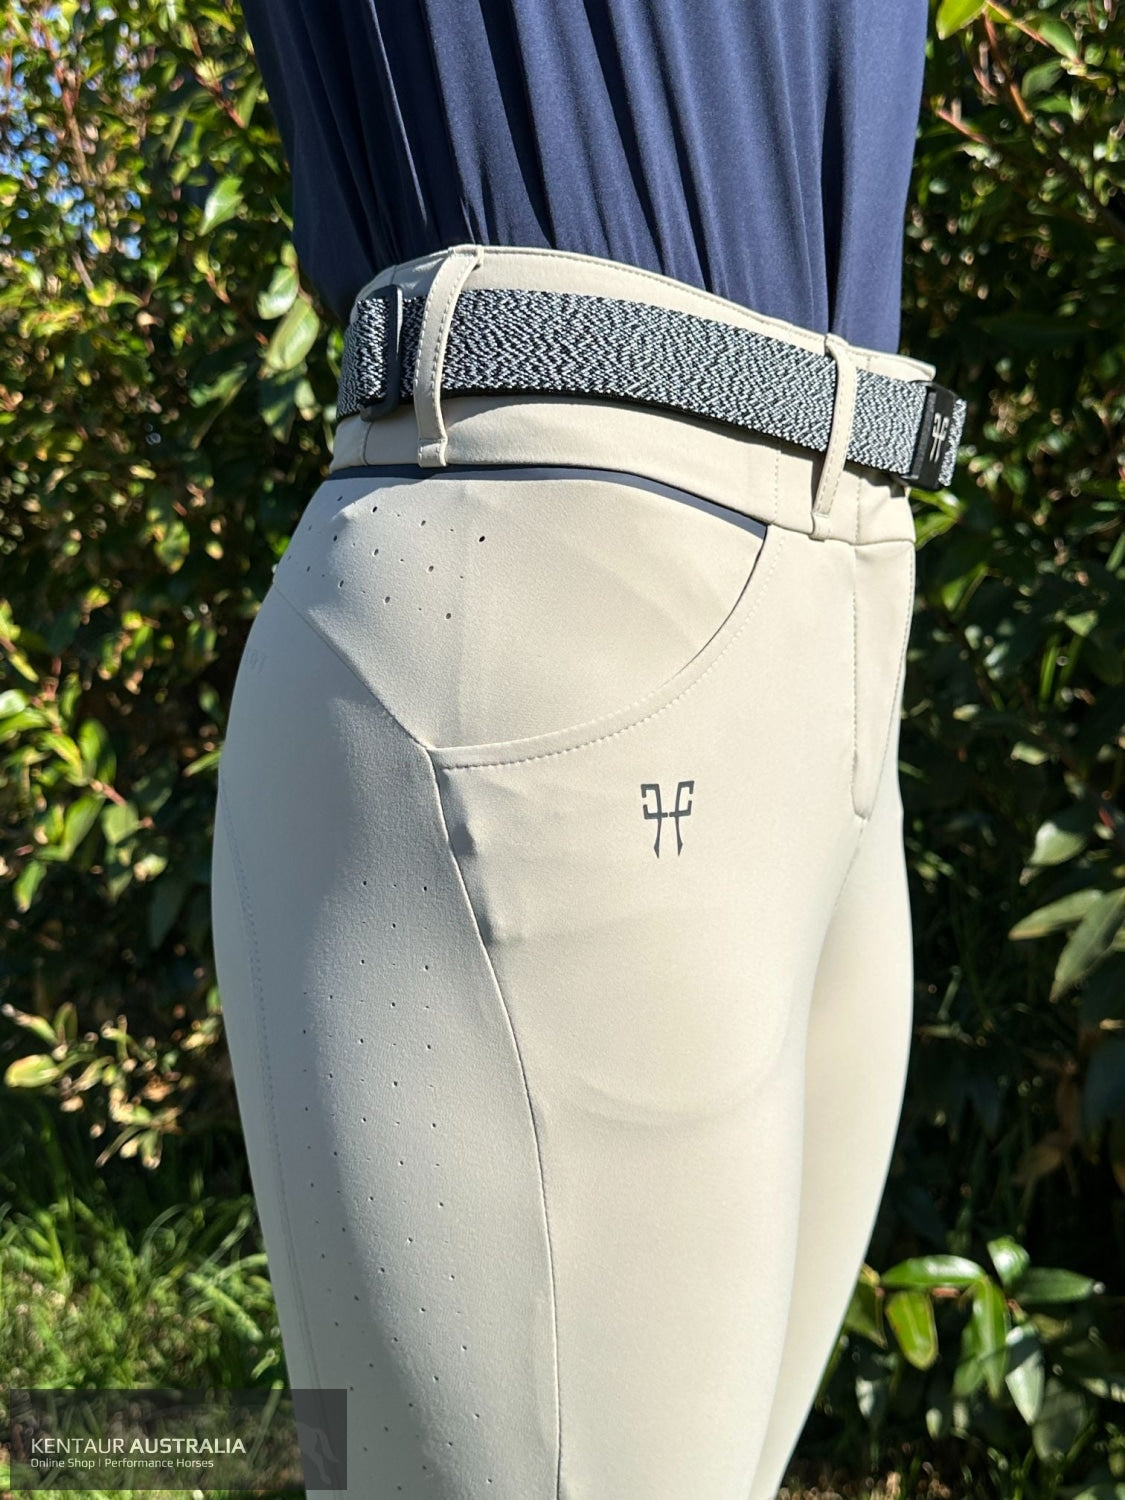 Horse Pilot ’X-Aerotech’ Womens Competition Breeches Competition Breeches